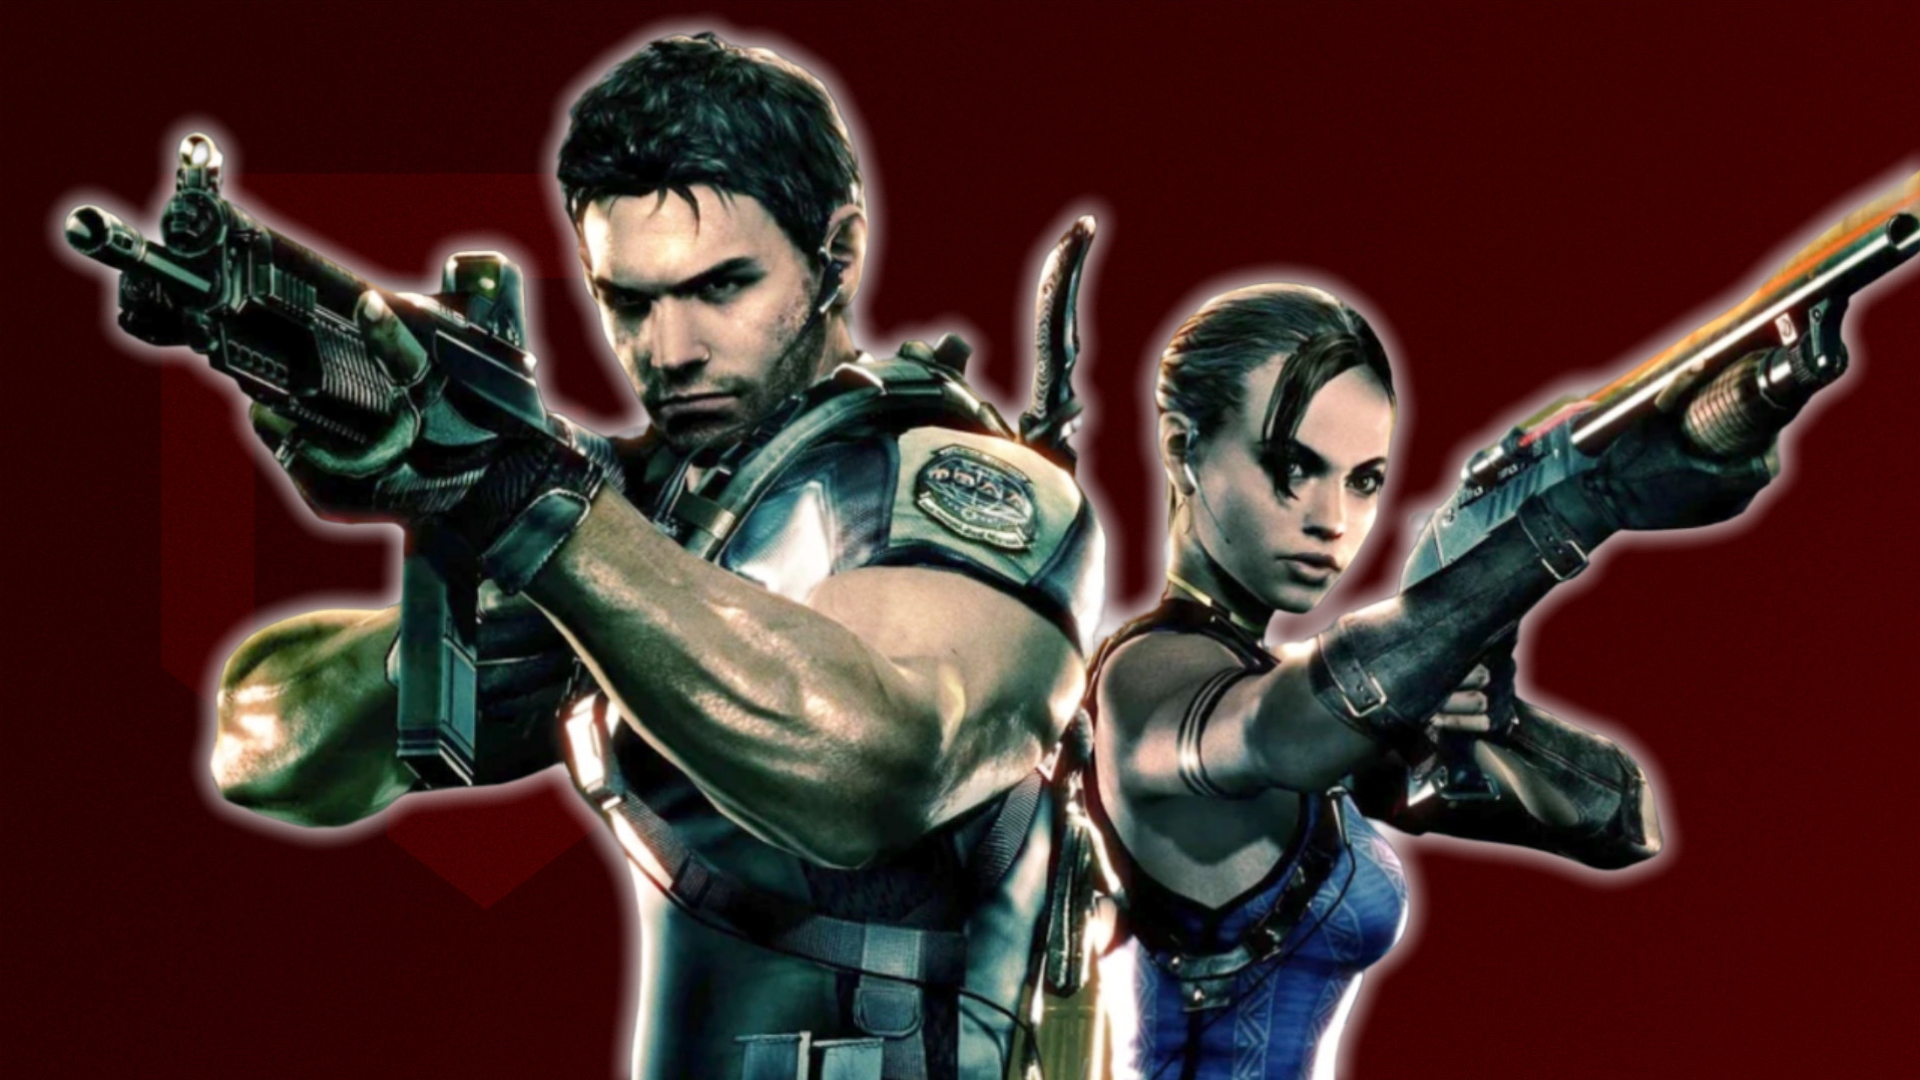 Resident Evil 5 lands on PS4 and Xbox One